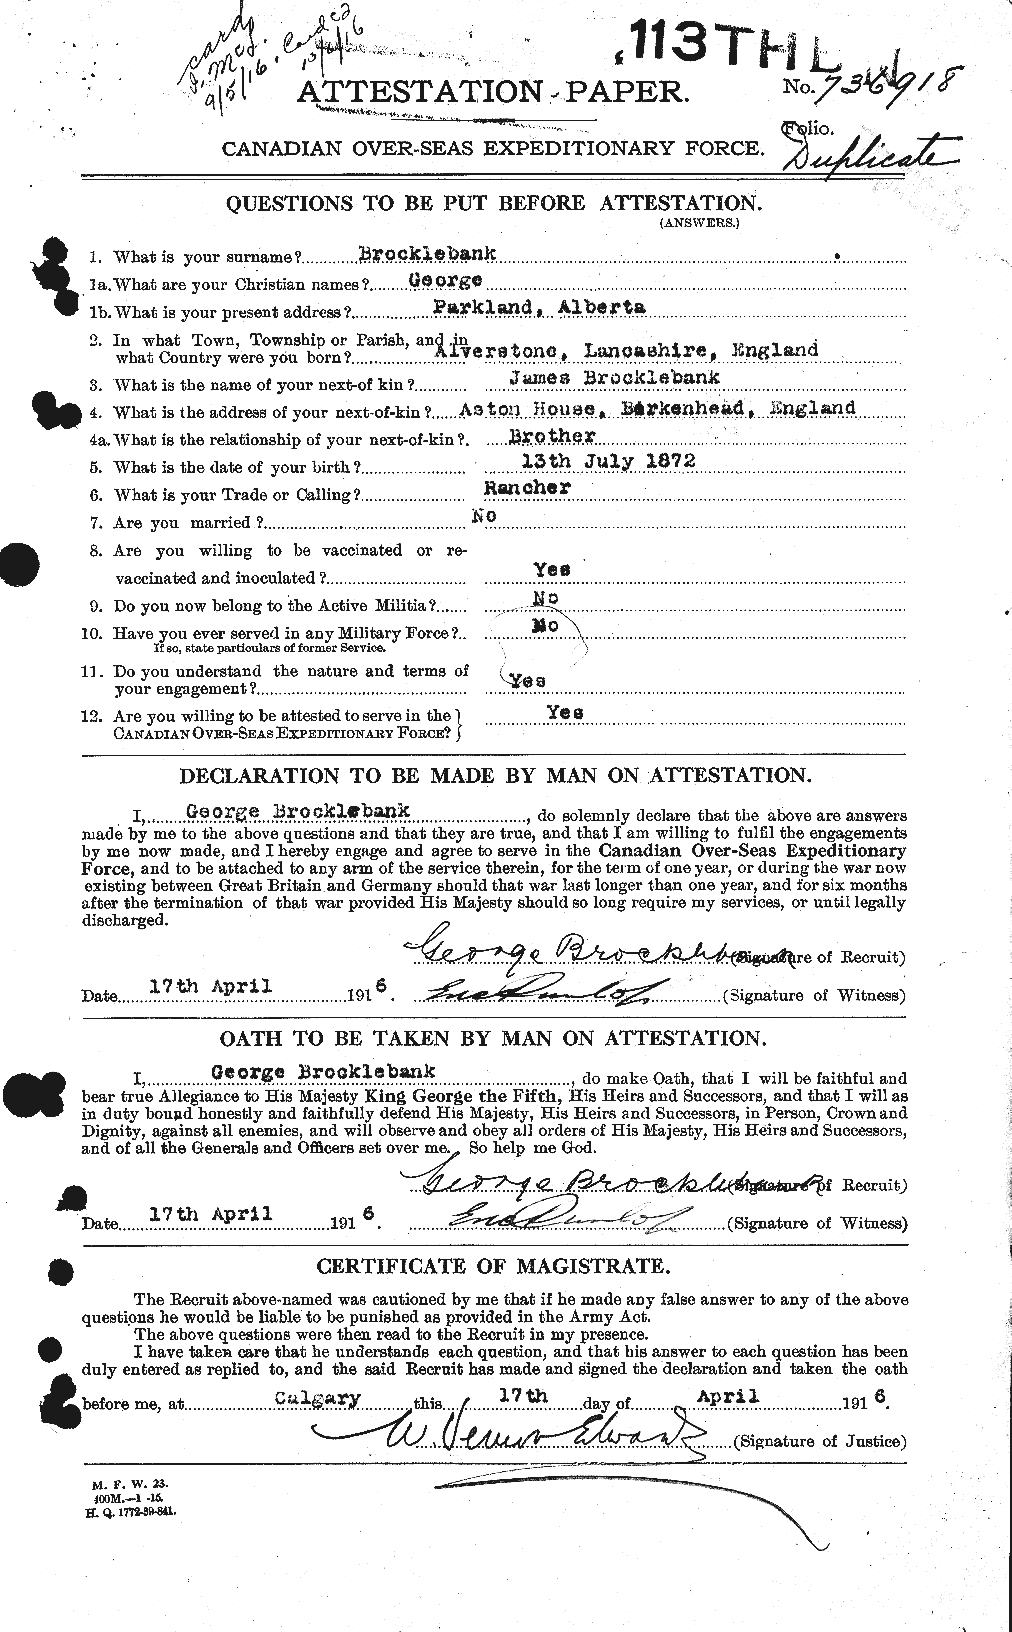 Personnel Records of the First World War - CEF 260928a